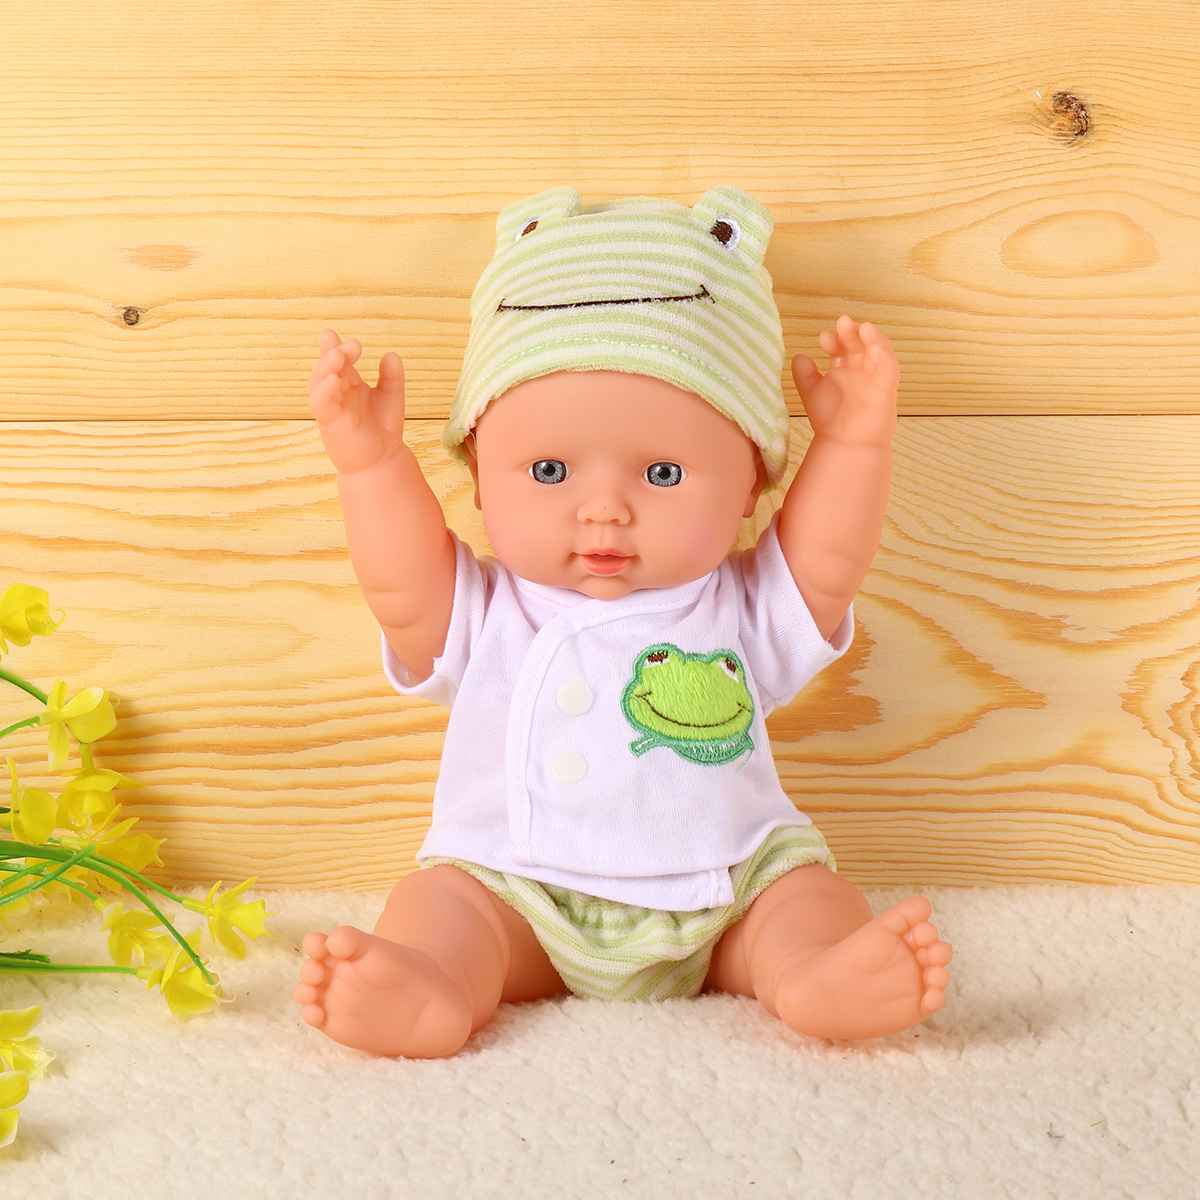 30CM-Height-Simulation-Soft-Silicone-Vinyl-Joint-Removable-Washable-Reborn-Baby-Doll-Toy-for-Kids-Bi-1812138-7